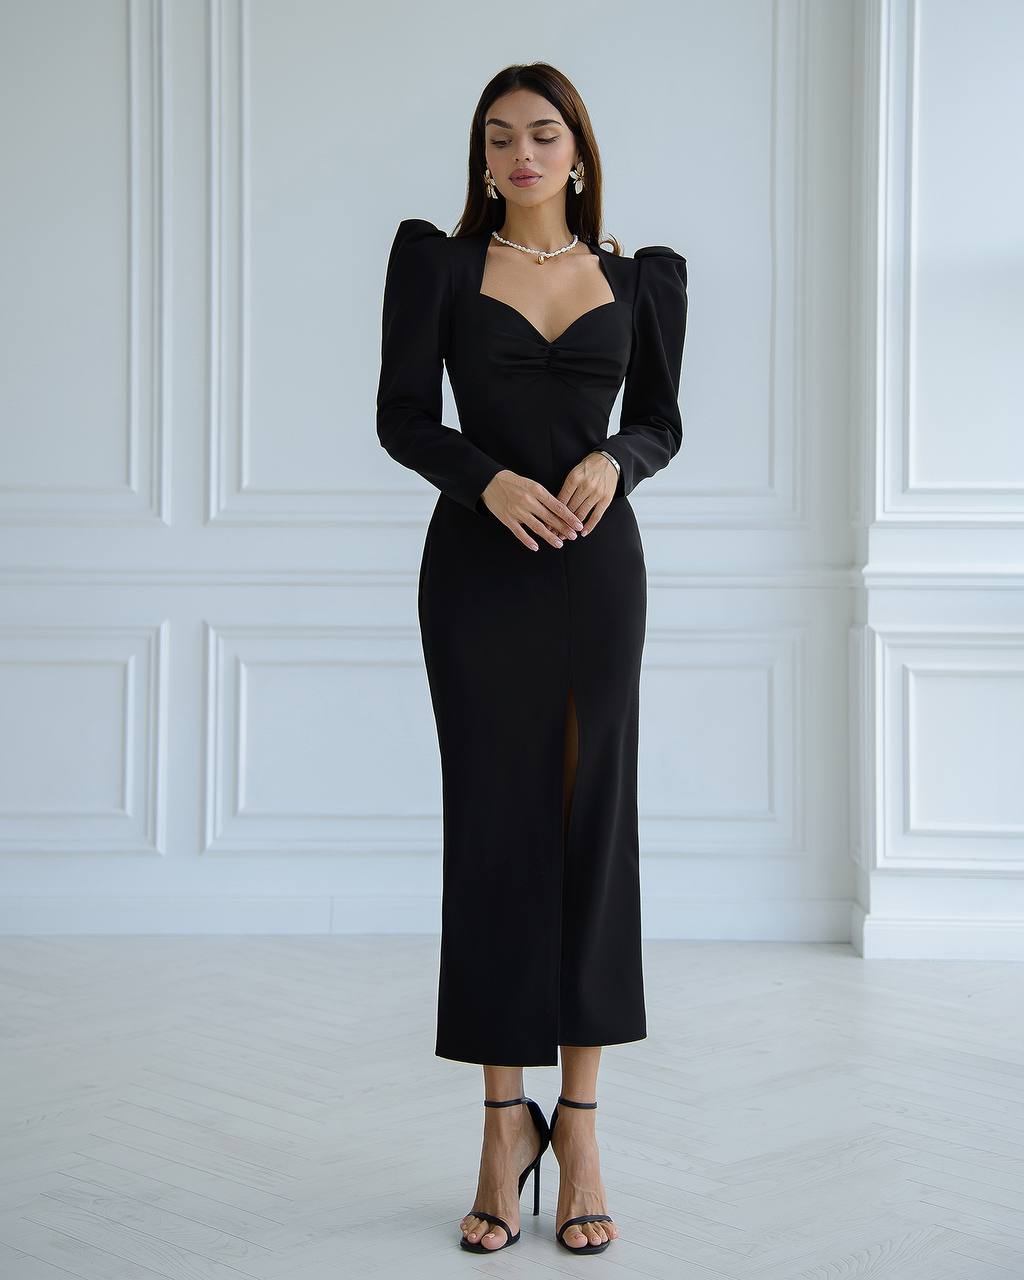 a woman in a black dress standing in a white room